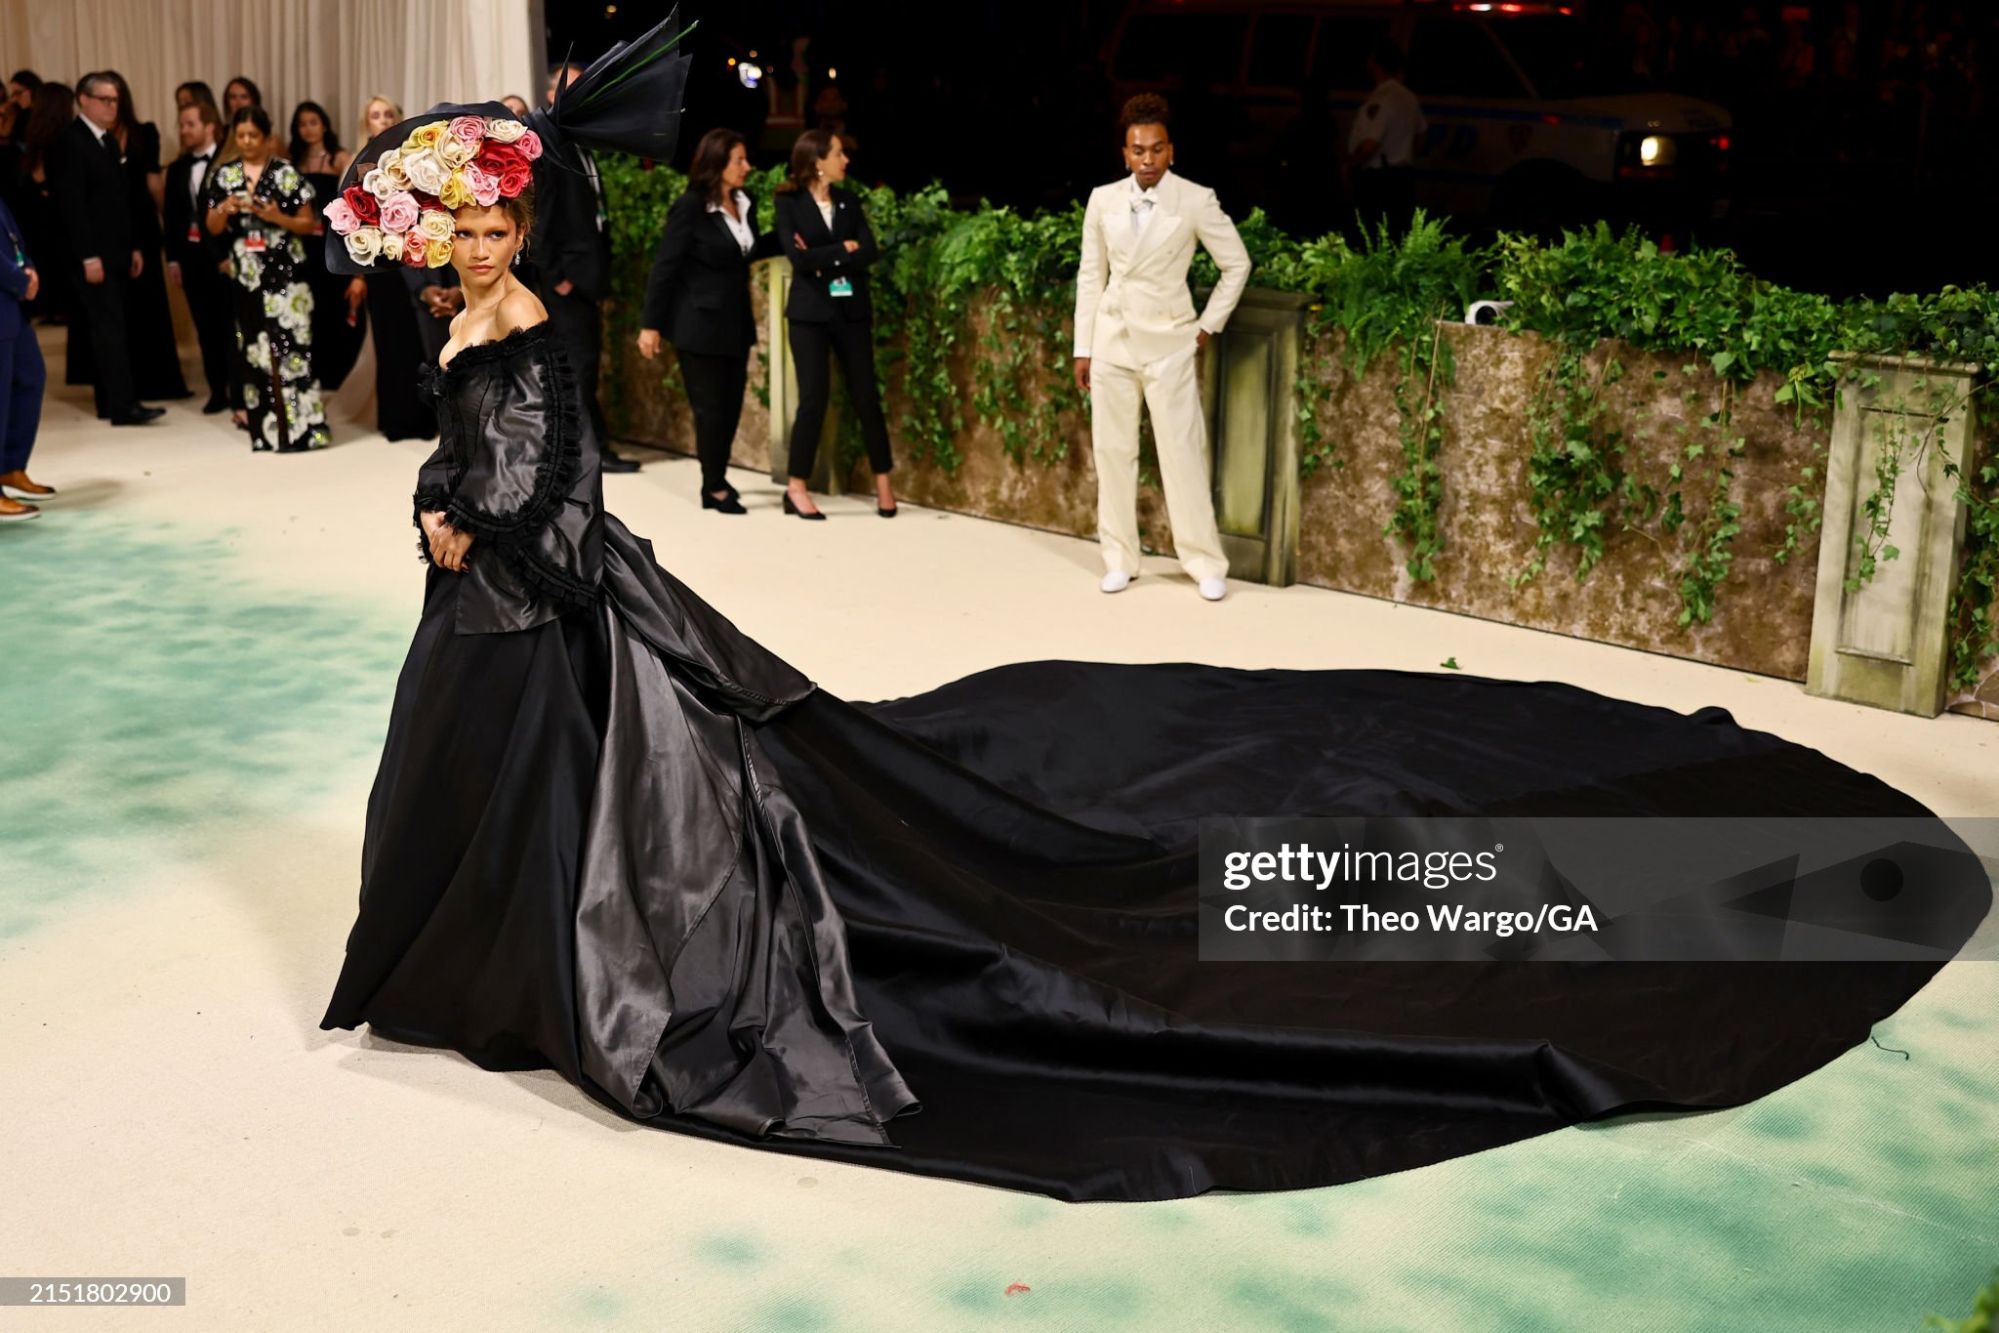 gettyimages-2151802900-2048x2048.jpg